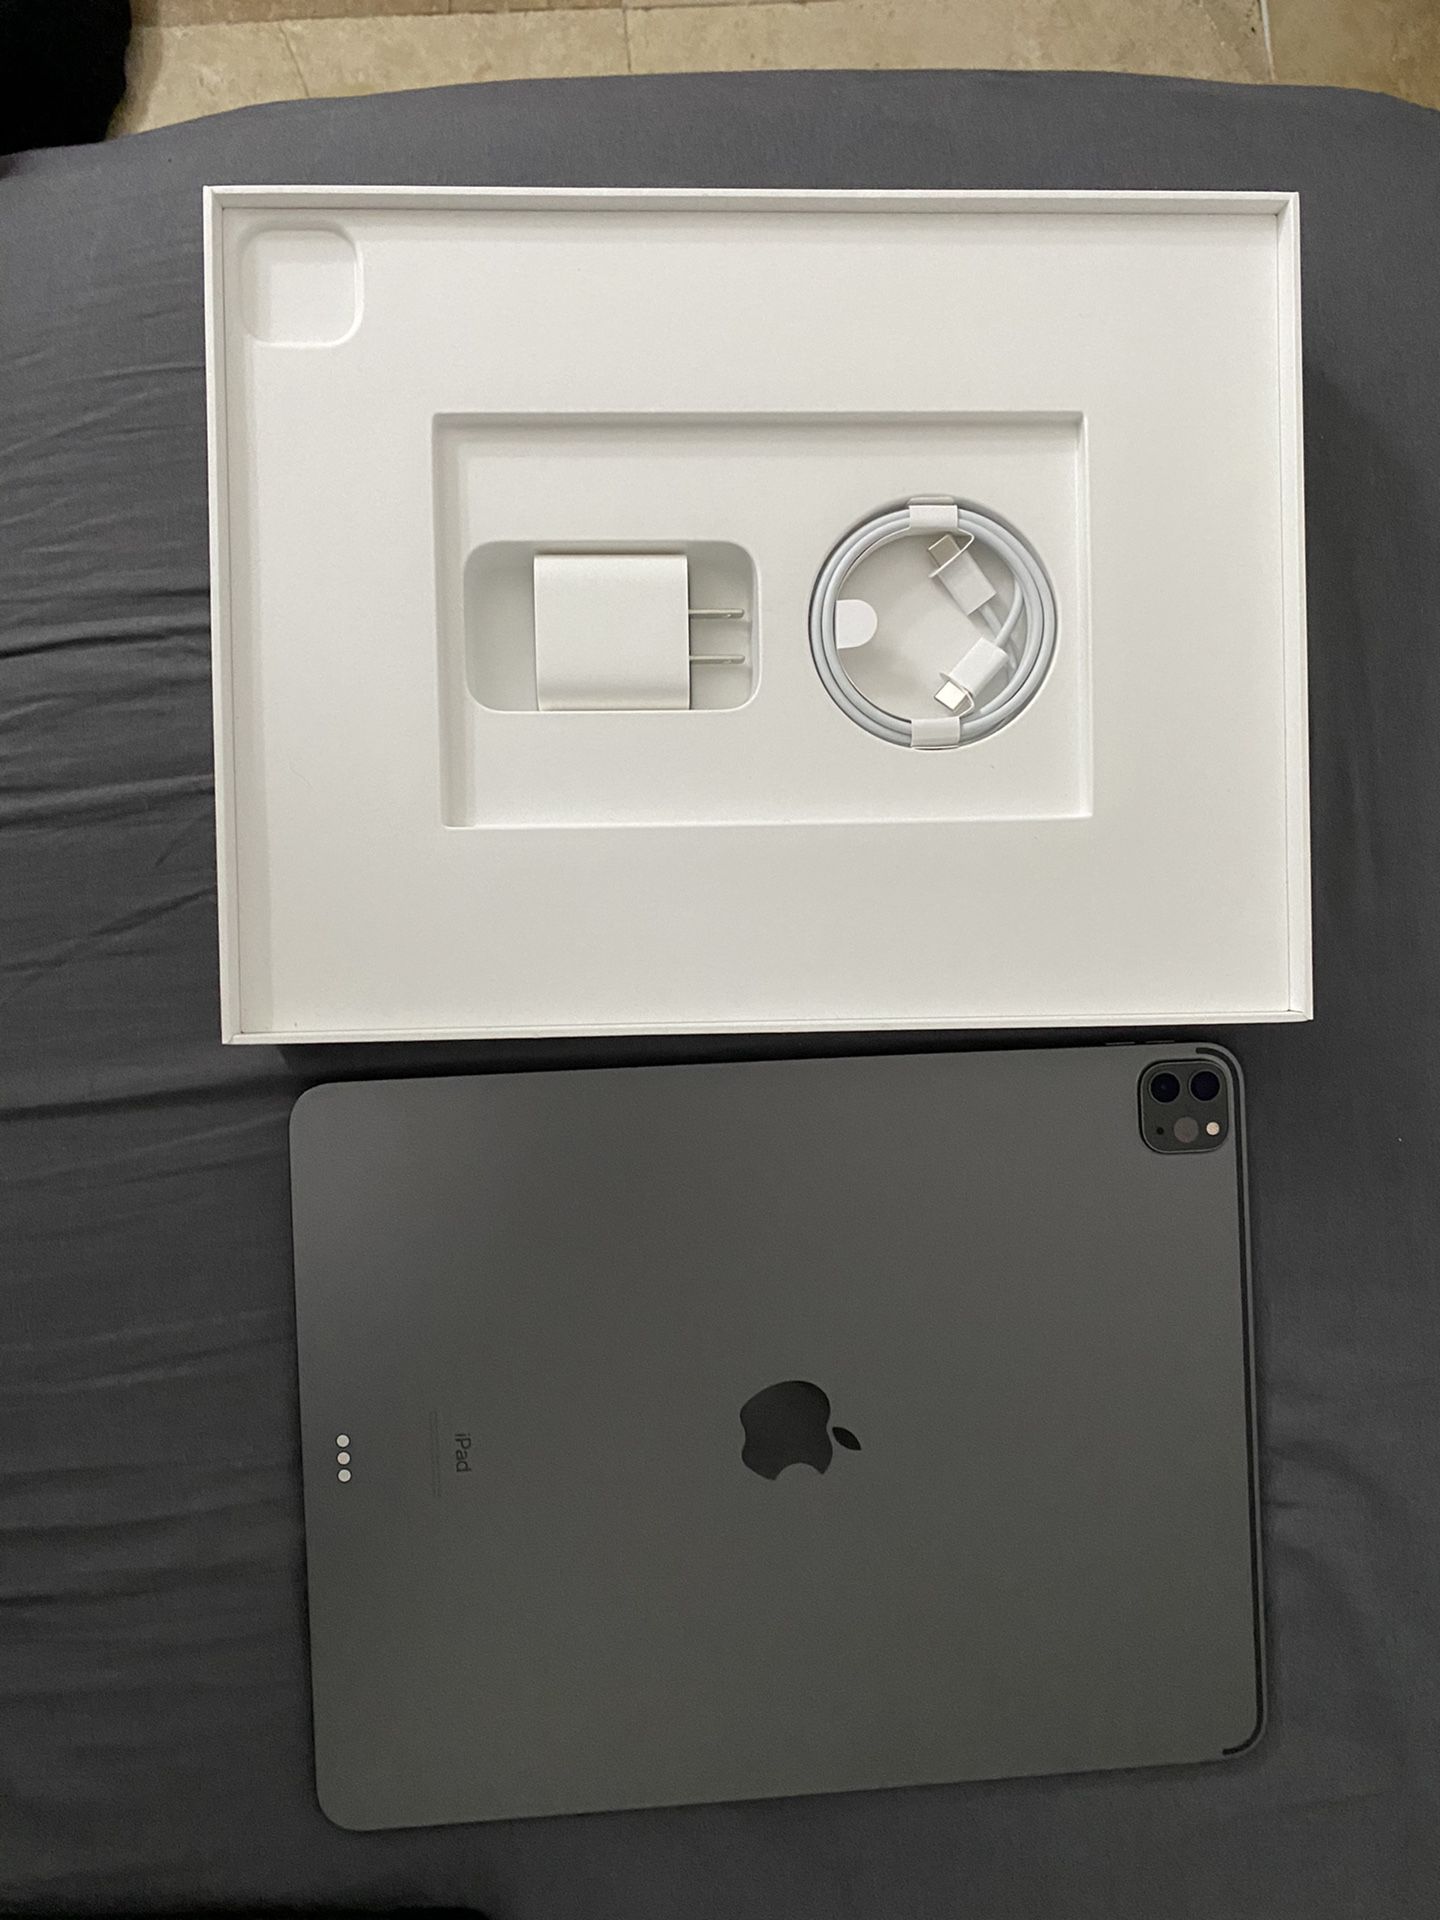 Brand New 128 GB WiFi Apple iPad Pro 12.9 (4th Gen). Folio case and screen protector included